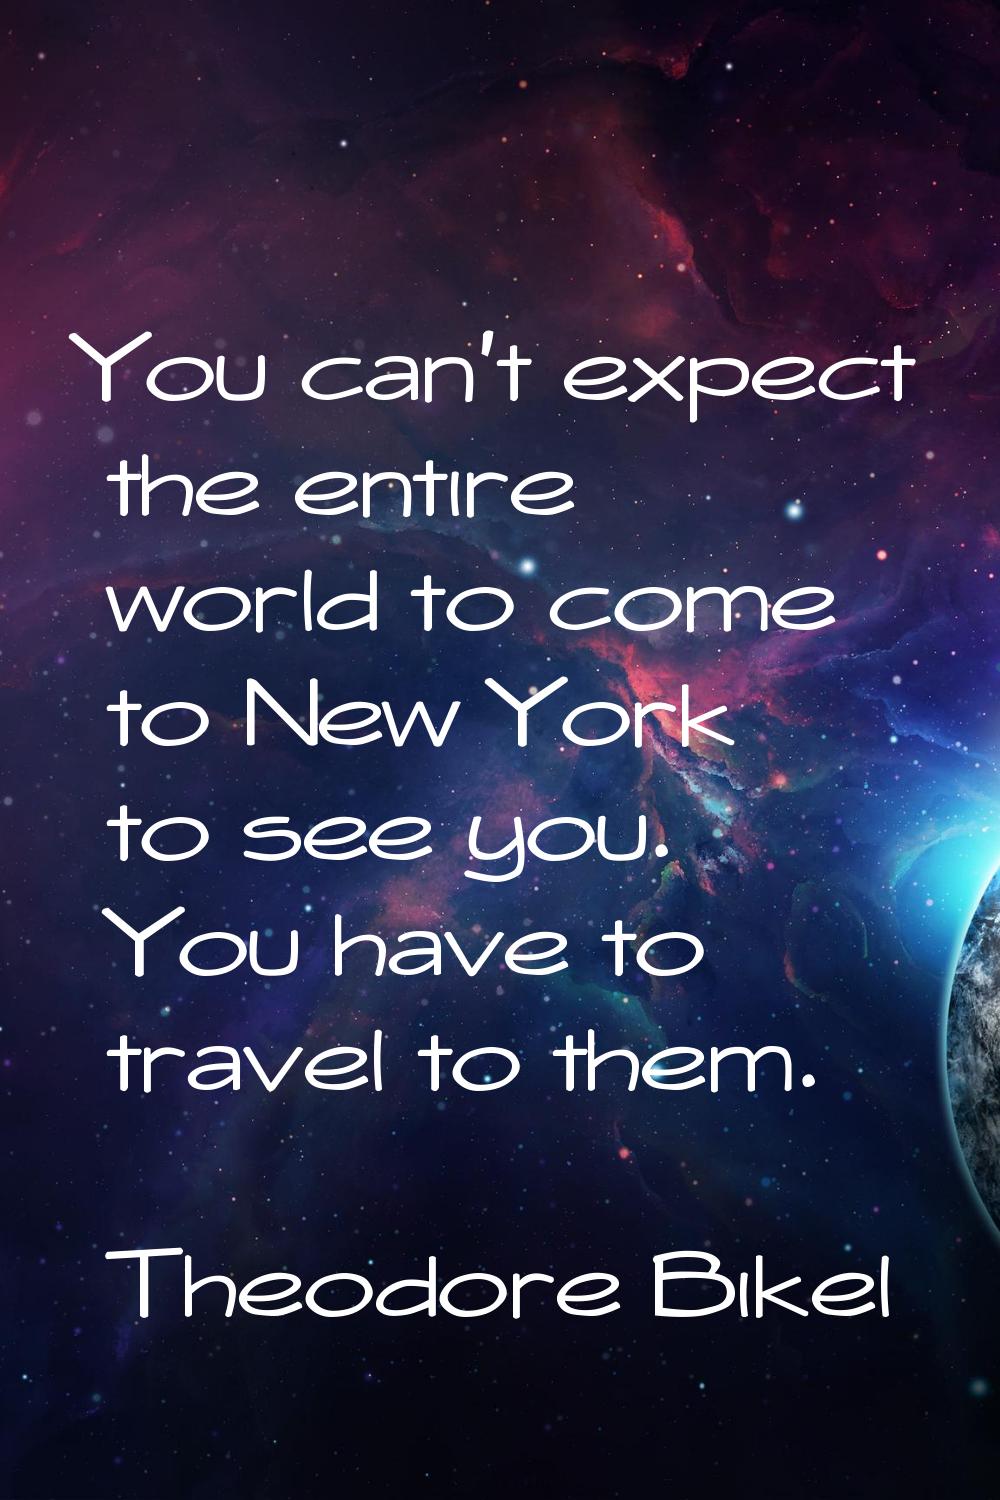 You can't expect the entire world to come to New York to see you. You have to travel to them.